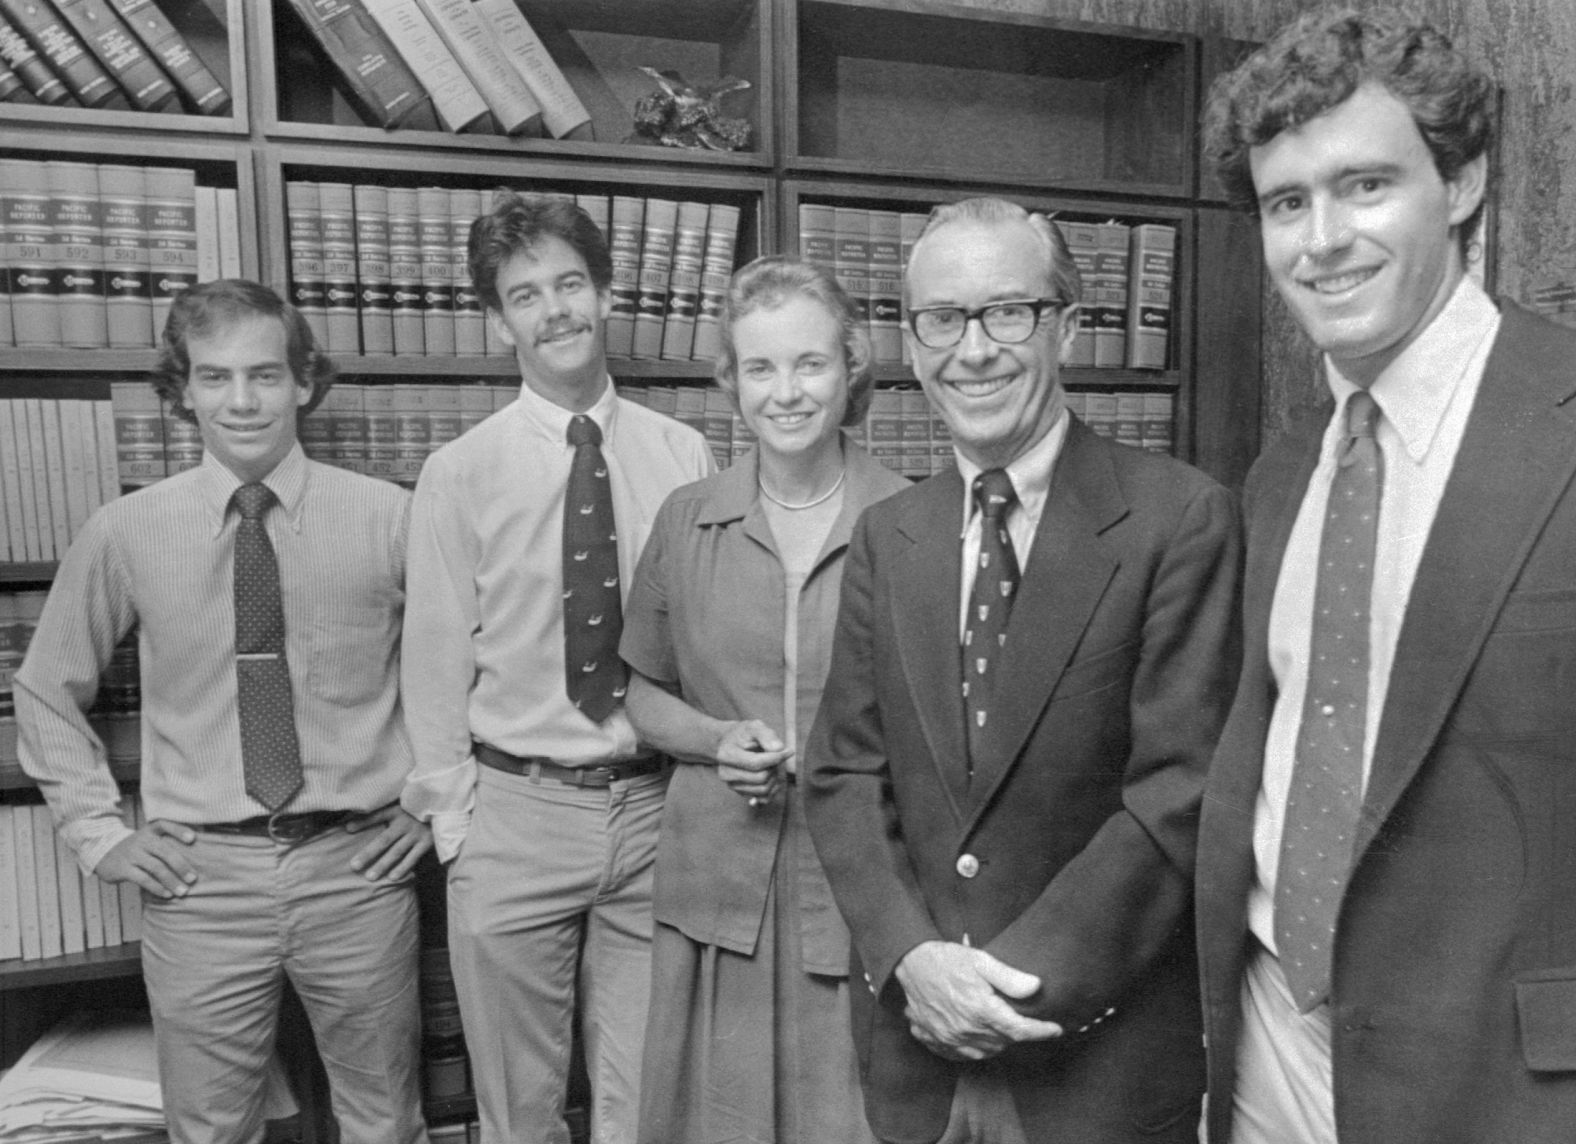 O'Connor poses with her family after she was nominated to the Supreme Court by President Ronald Reagan in 1981. With her, from left, are her son Jay, son Brian, husband John and son Scott.